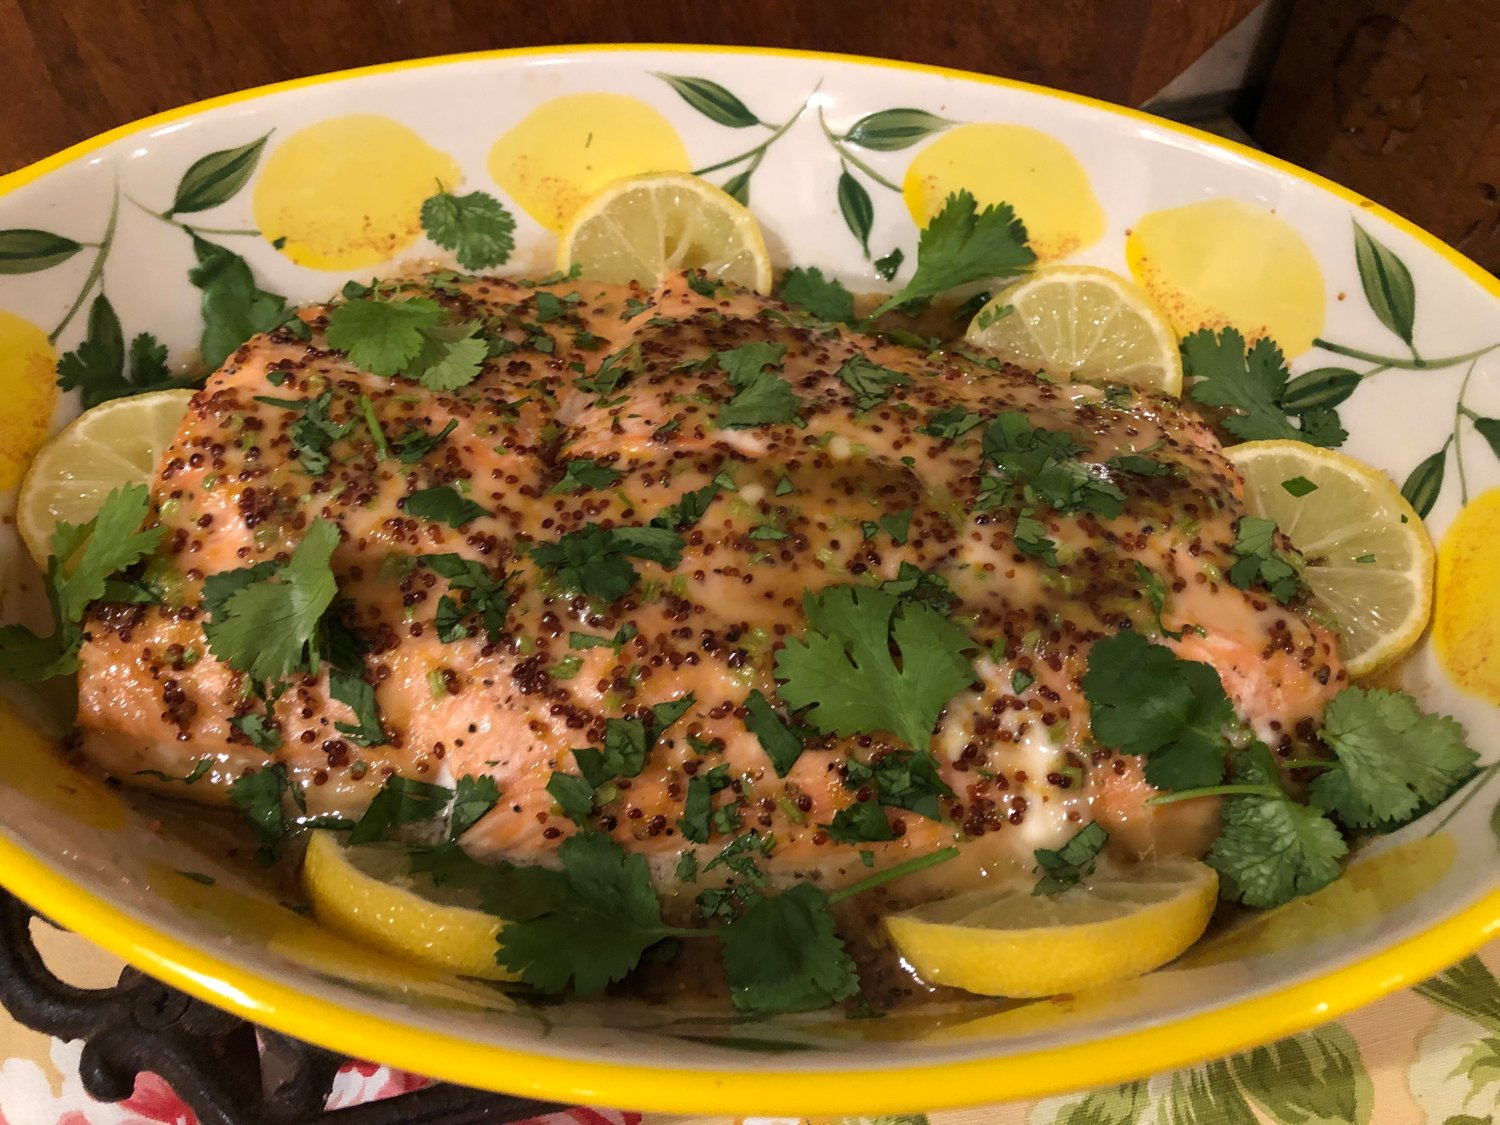 The sweet maple syrup in Genevieve Ko’s Maple-Baked Salmon is deliciously counterbalanced by the piquant tang of Dijon mustard and fresh cilantro.